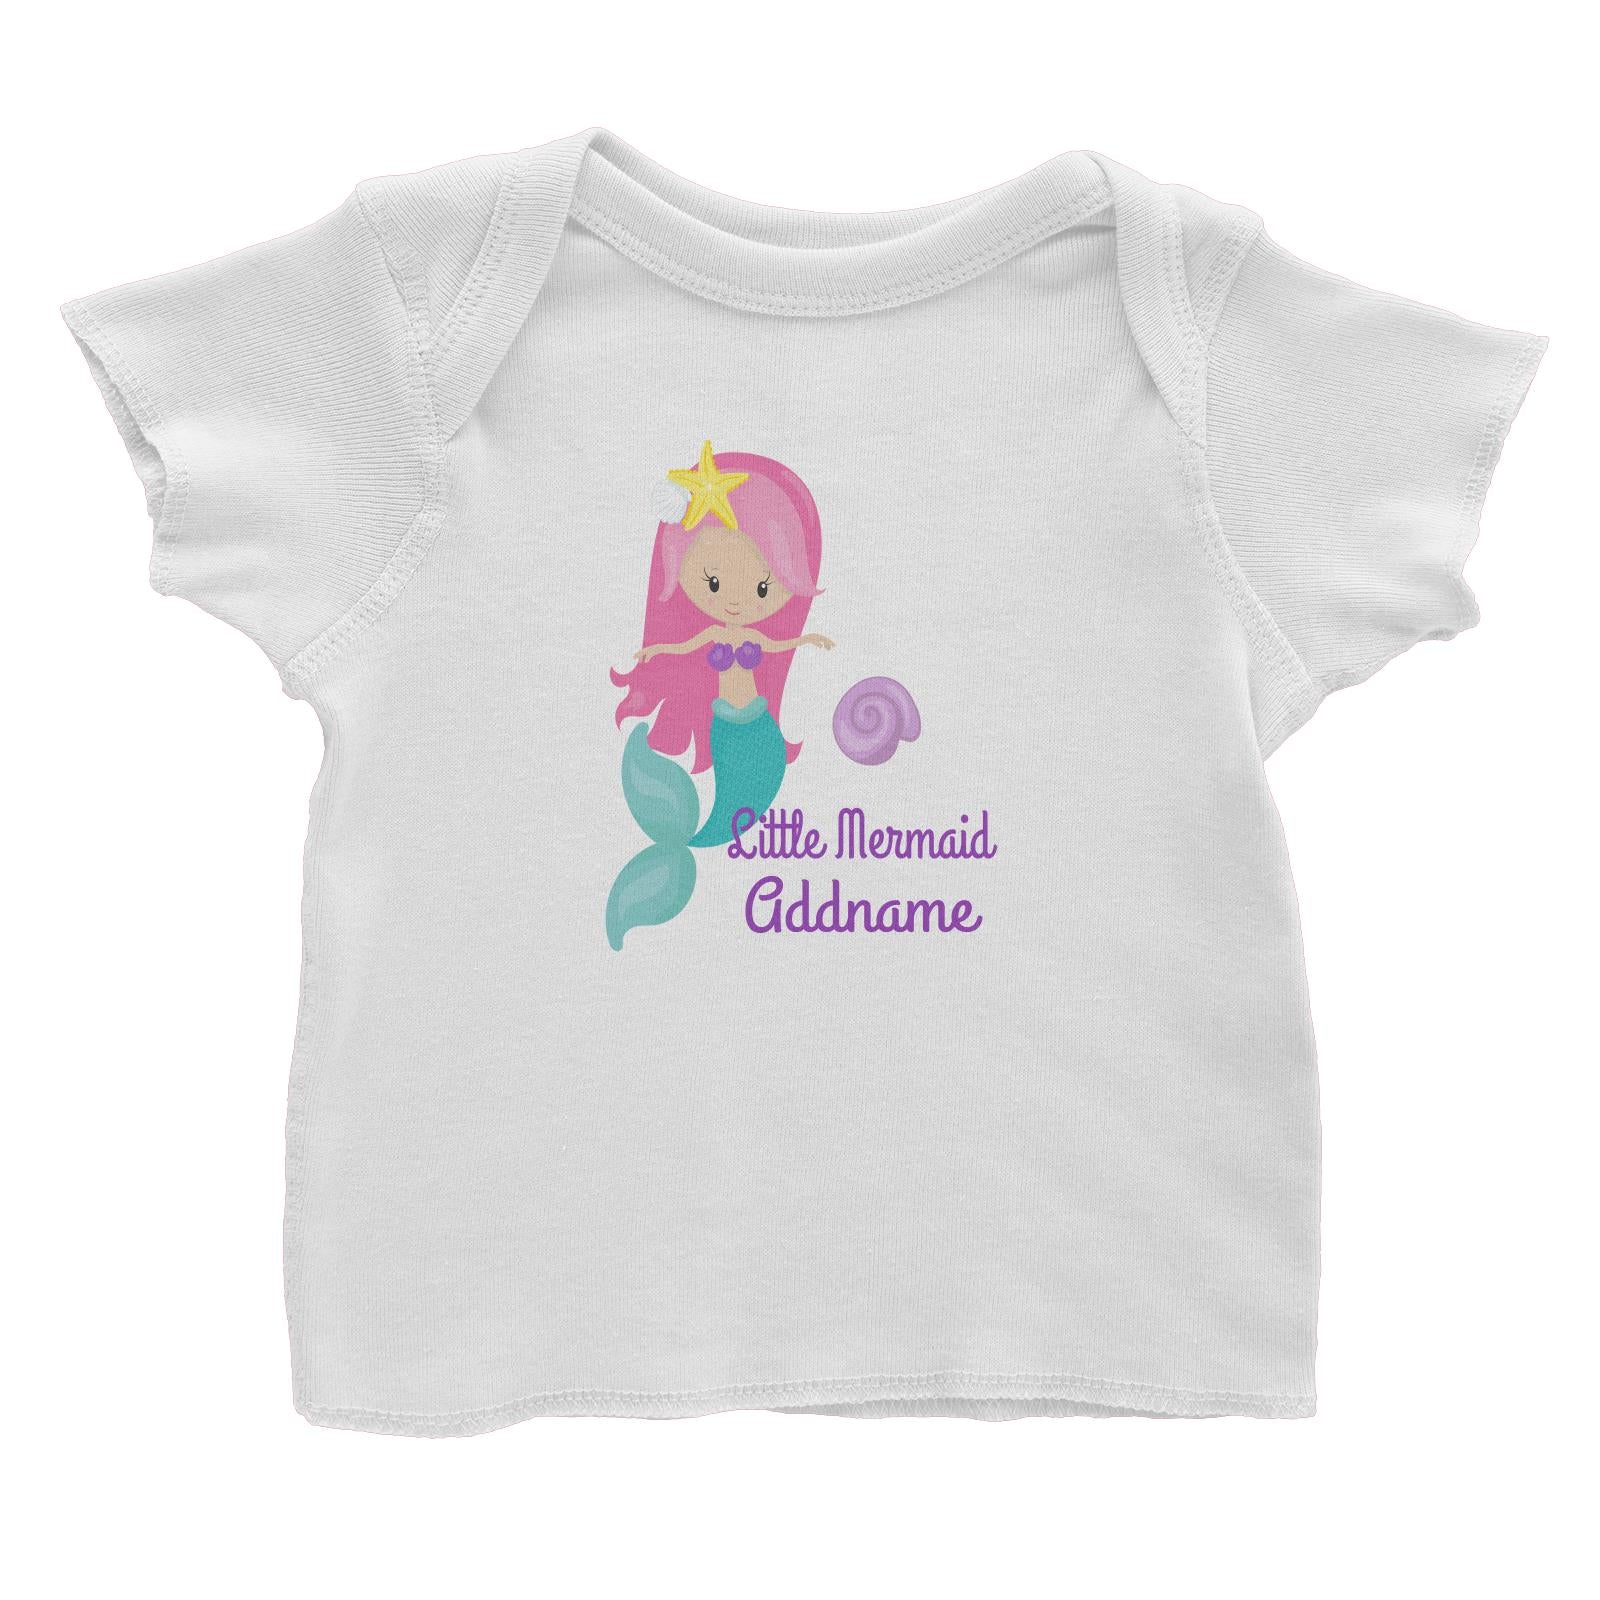 Little Mermaid Upright with Seashell Addname Baby T-Shirt